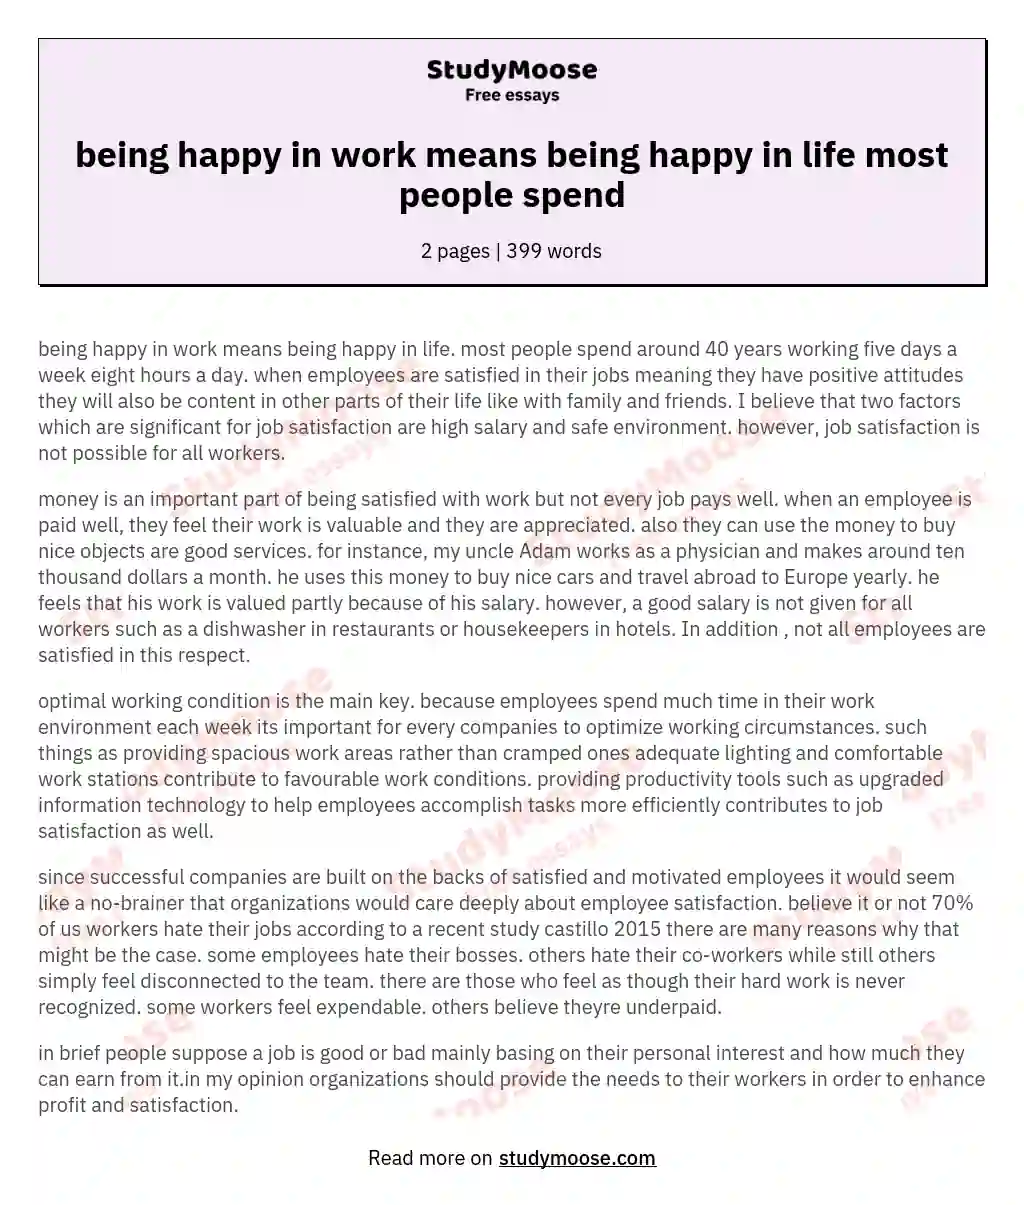 being happy in work means being happy in life most people spend